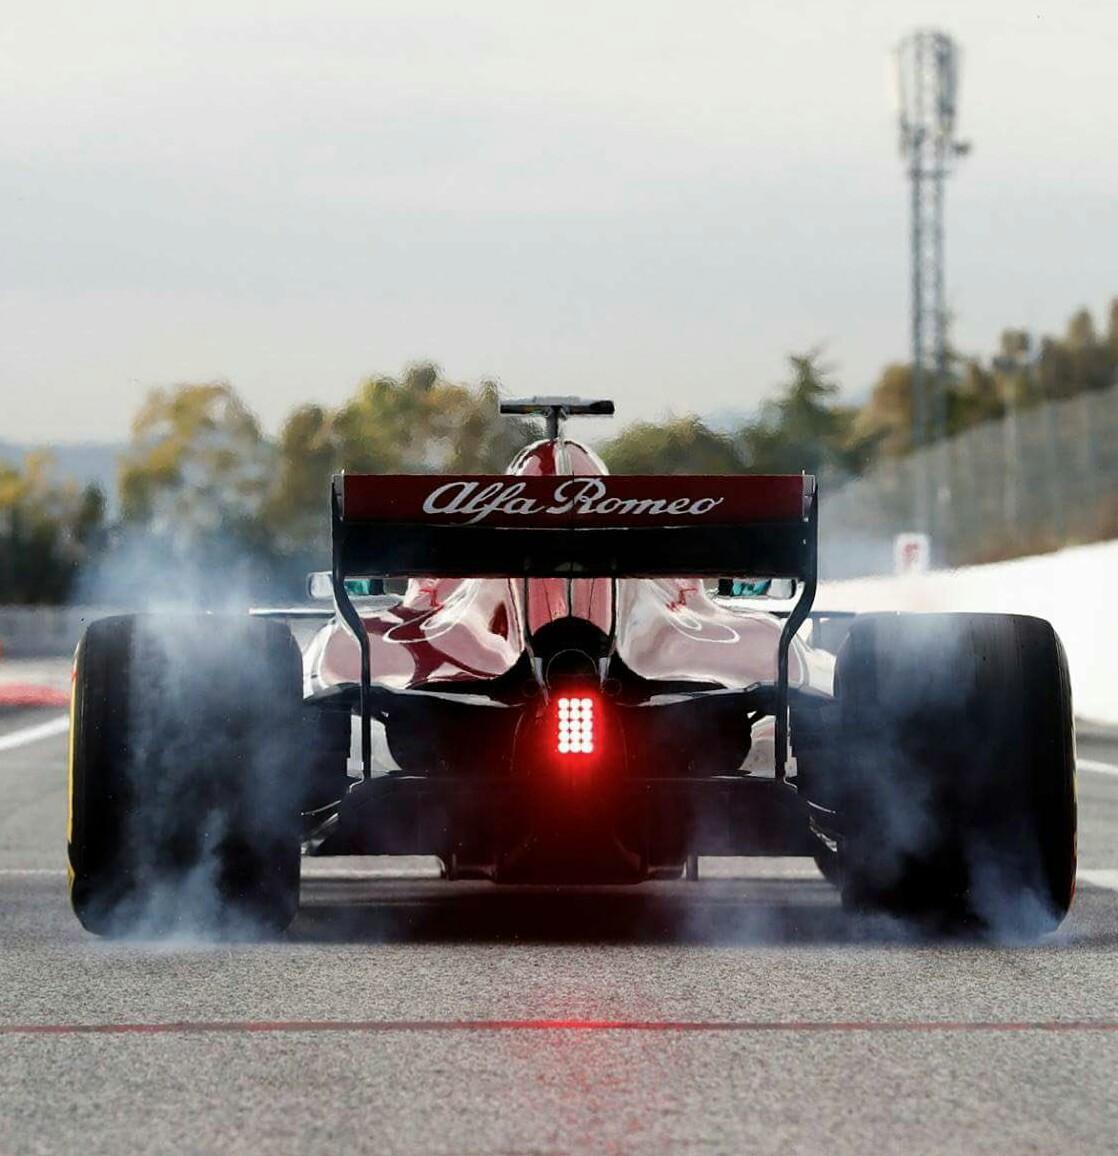 The rear of the Alfa Romeo Sauber C37 is absolutely beautiful